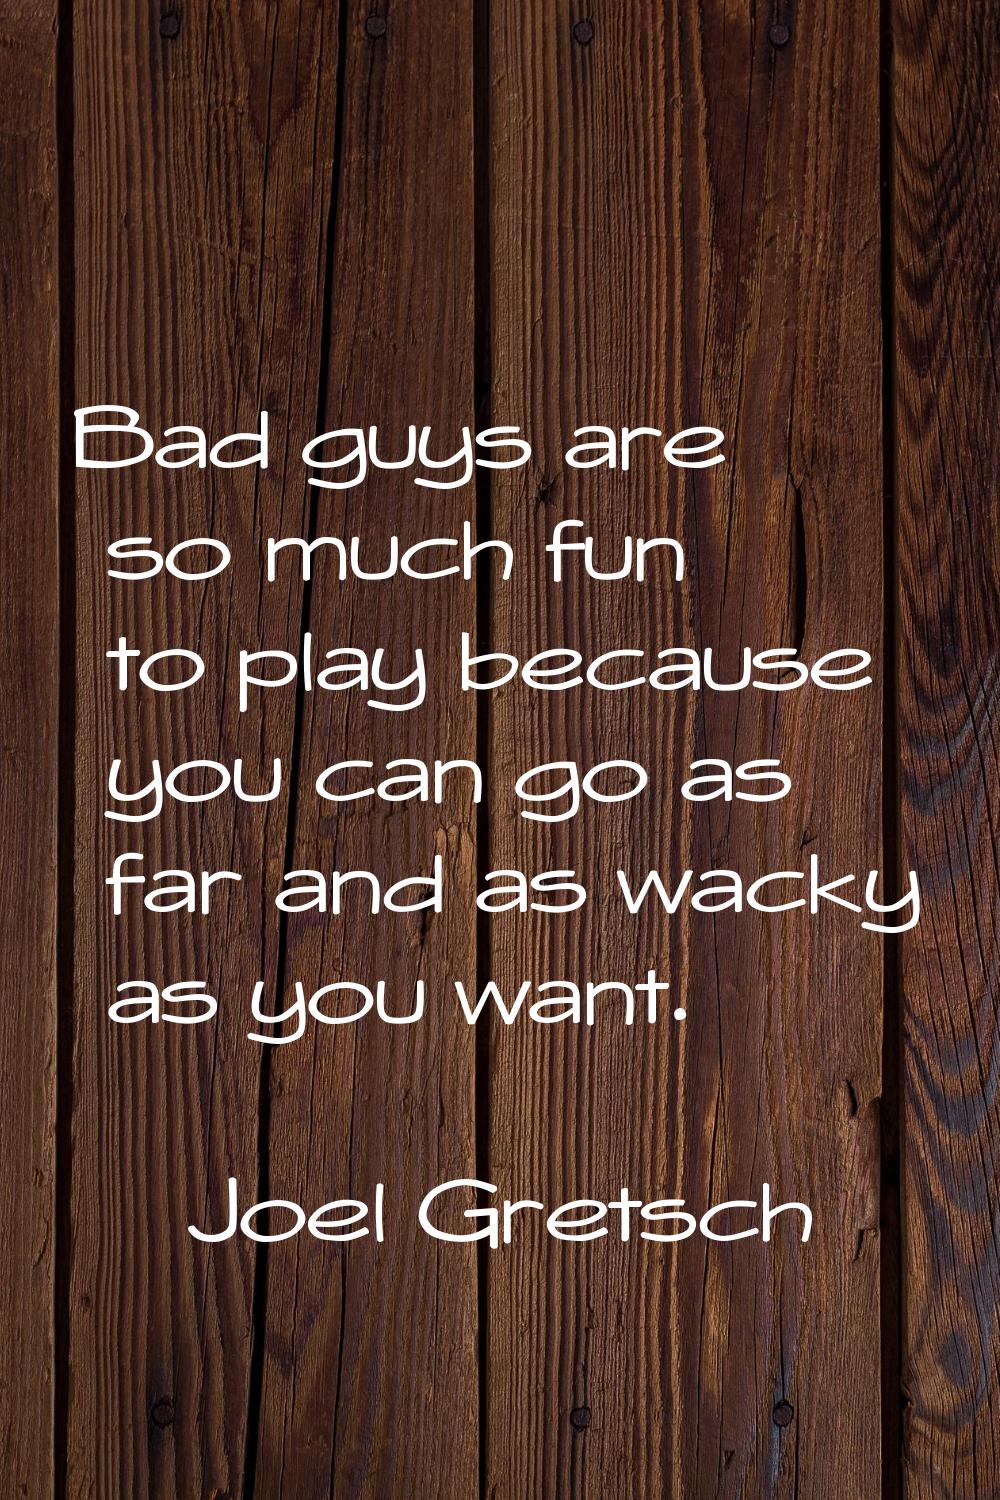 Bad guys are so much fun to play because you can go as far and as wacky as you want.